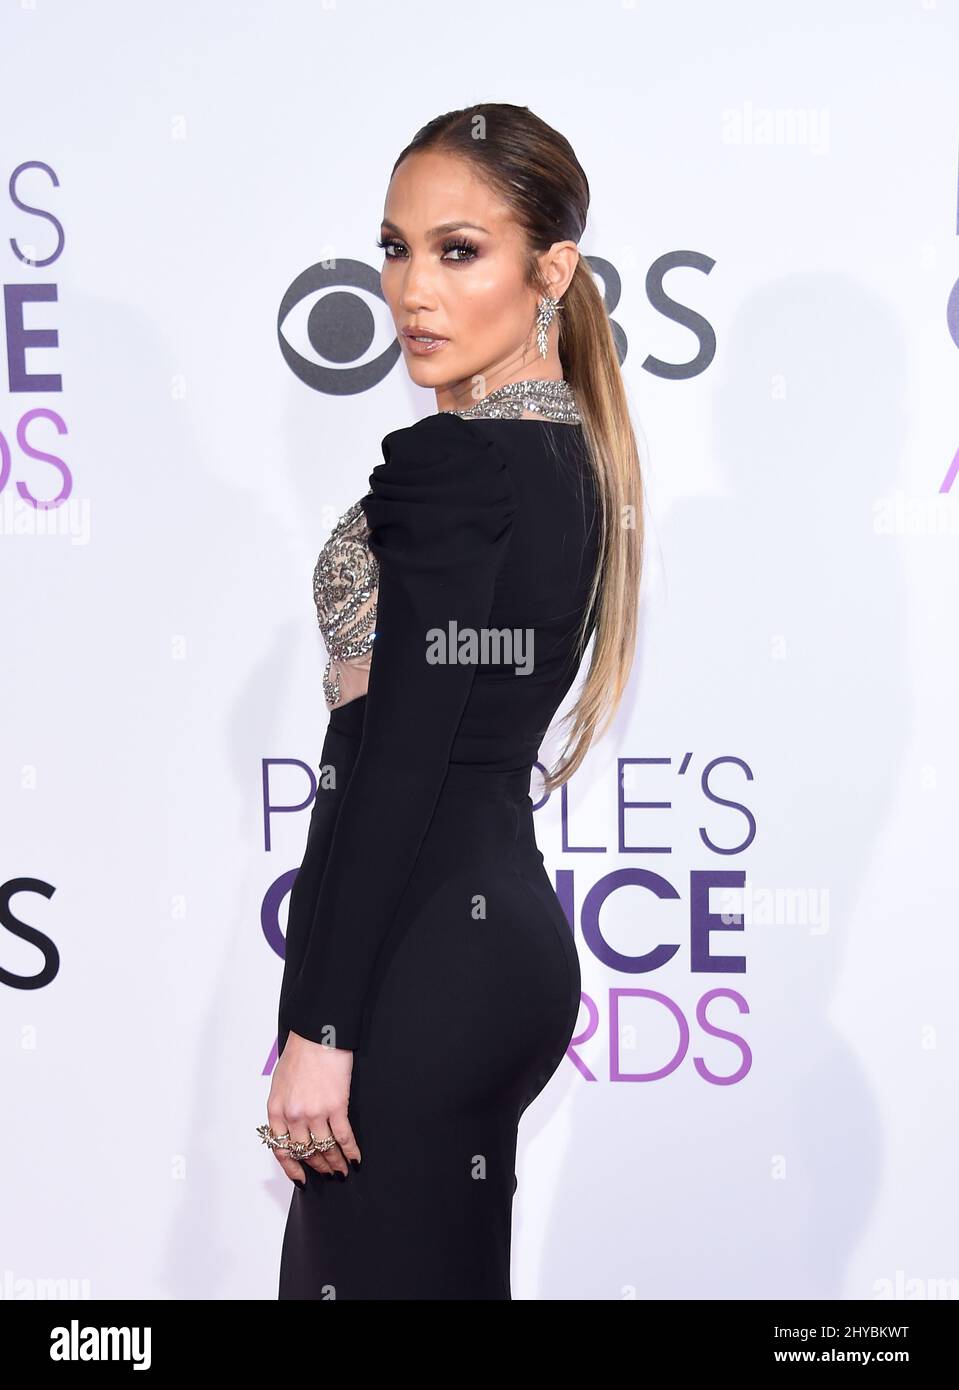 Jennifer Lopez nimmt an den People's Choice Awards 2017 im Microsoft Theater L.A. Teil Live in LSO Angeles, USA Stockfoto